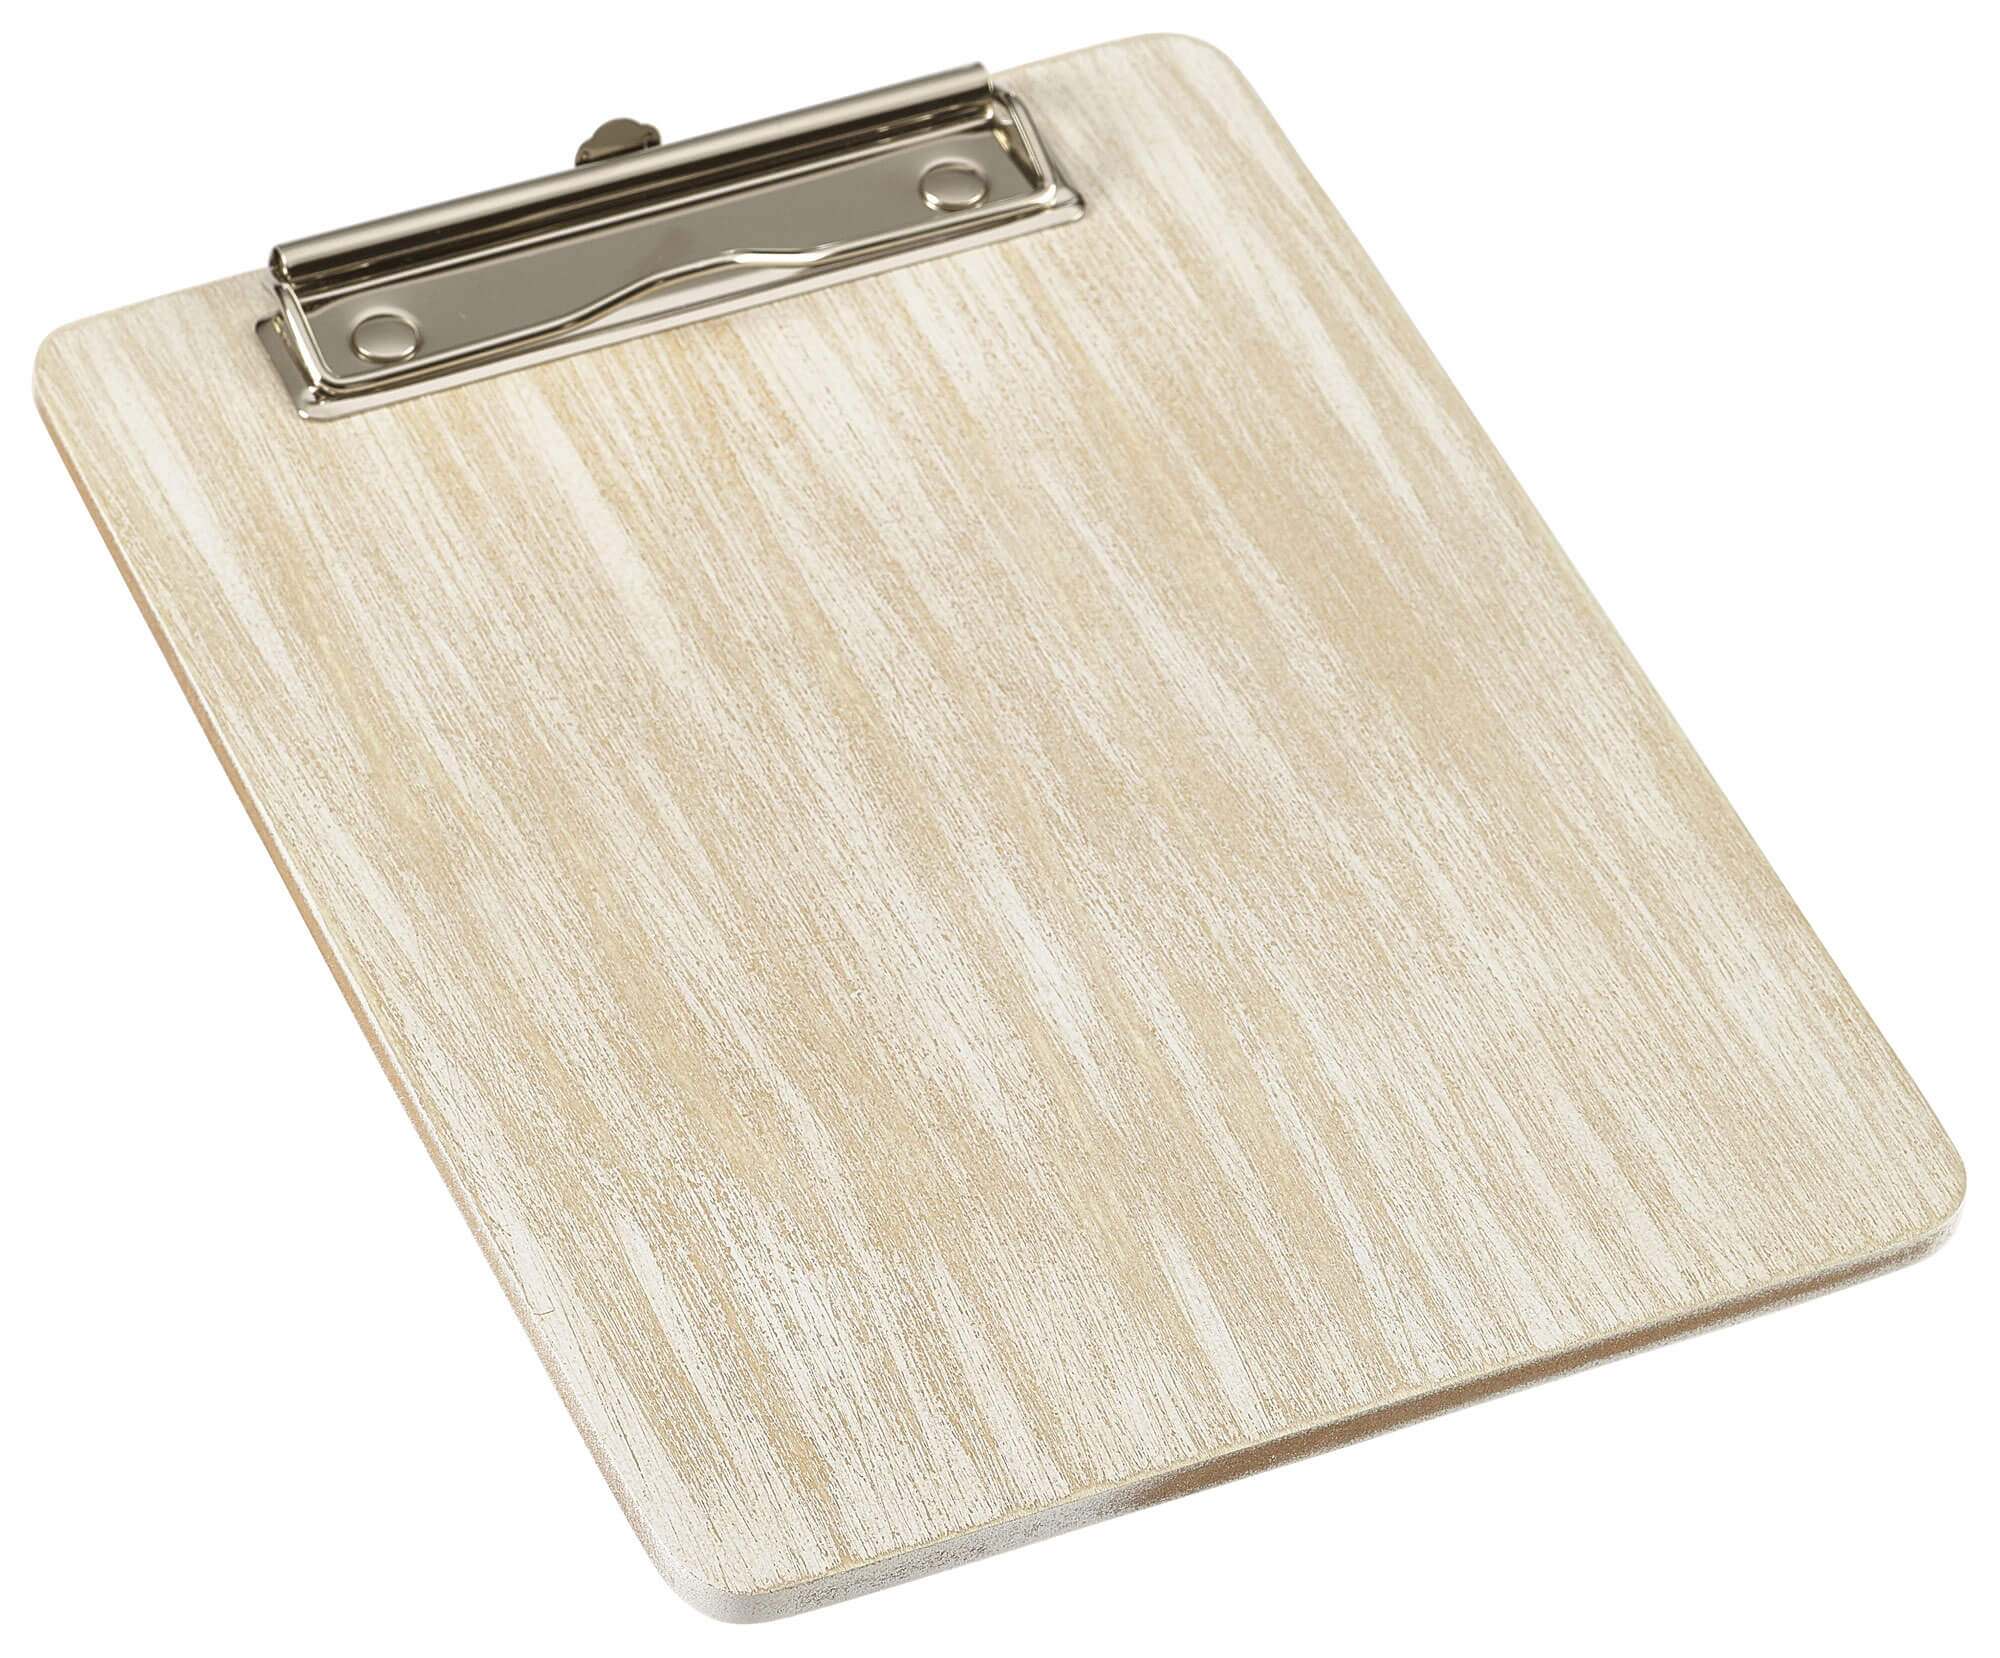 Clipboard DIN A5, wooden - white